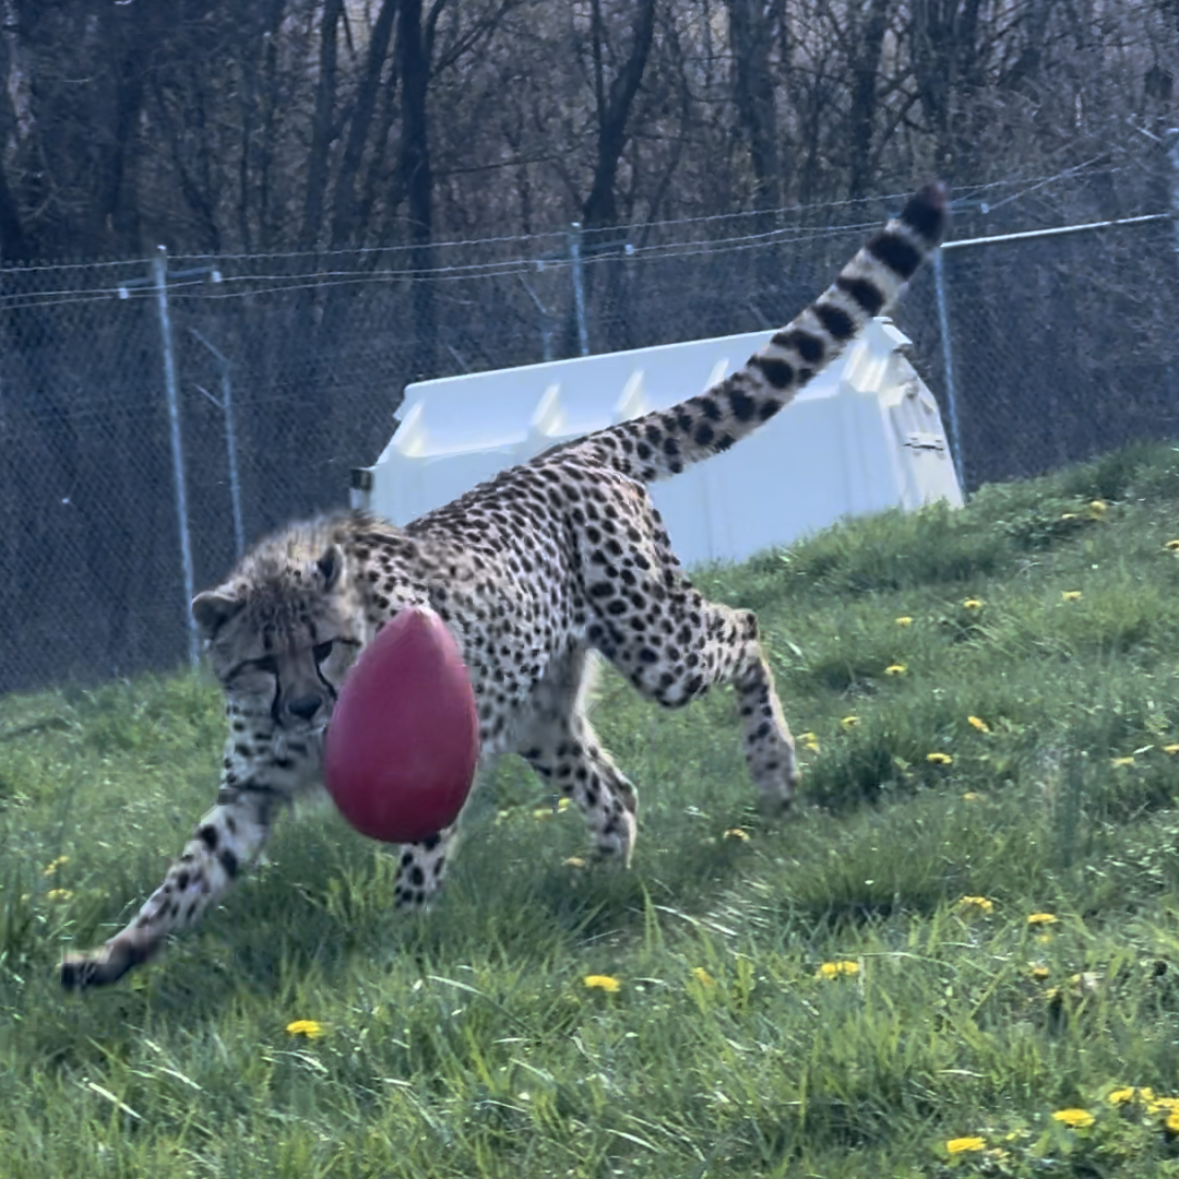 Action shot of a juvenile male cheetah chasing a bouncing red egg toy.